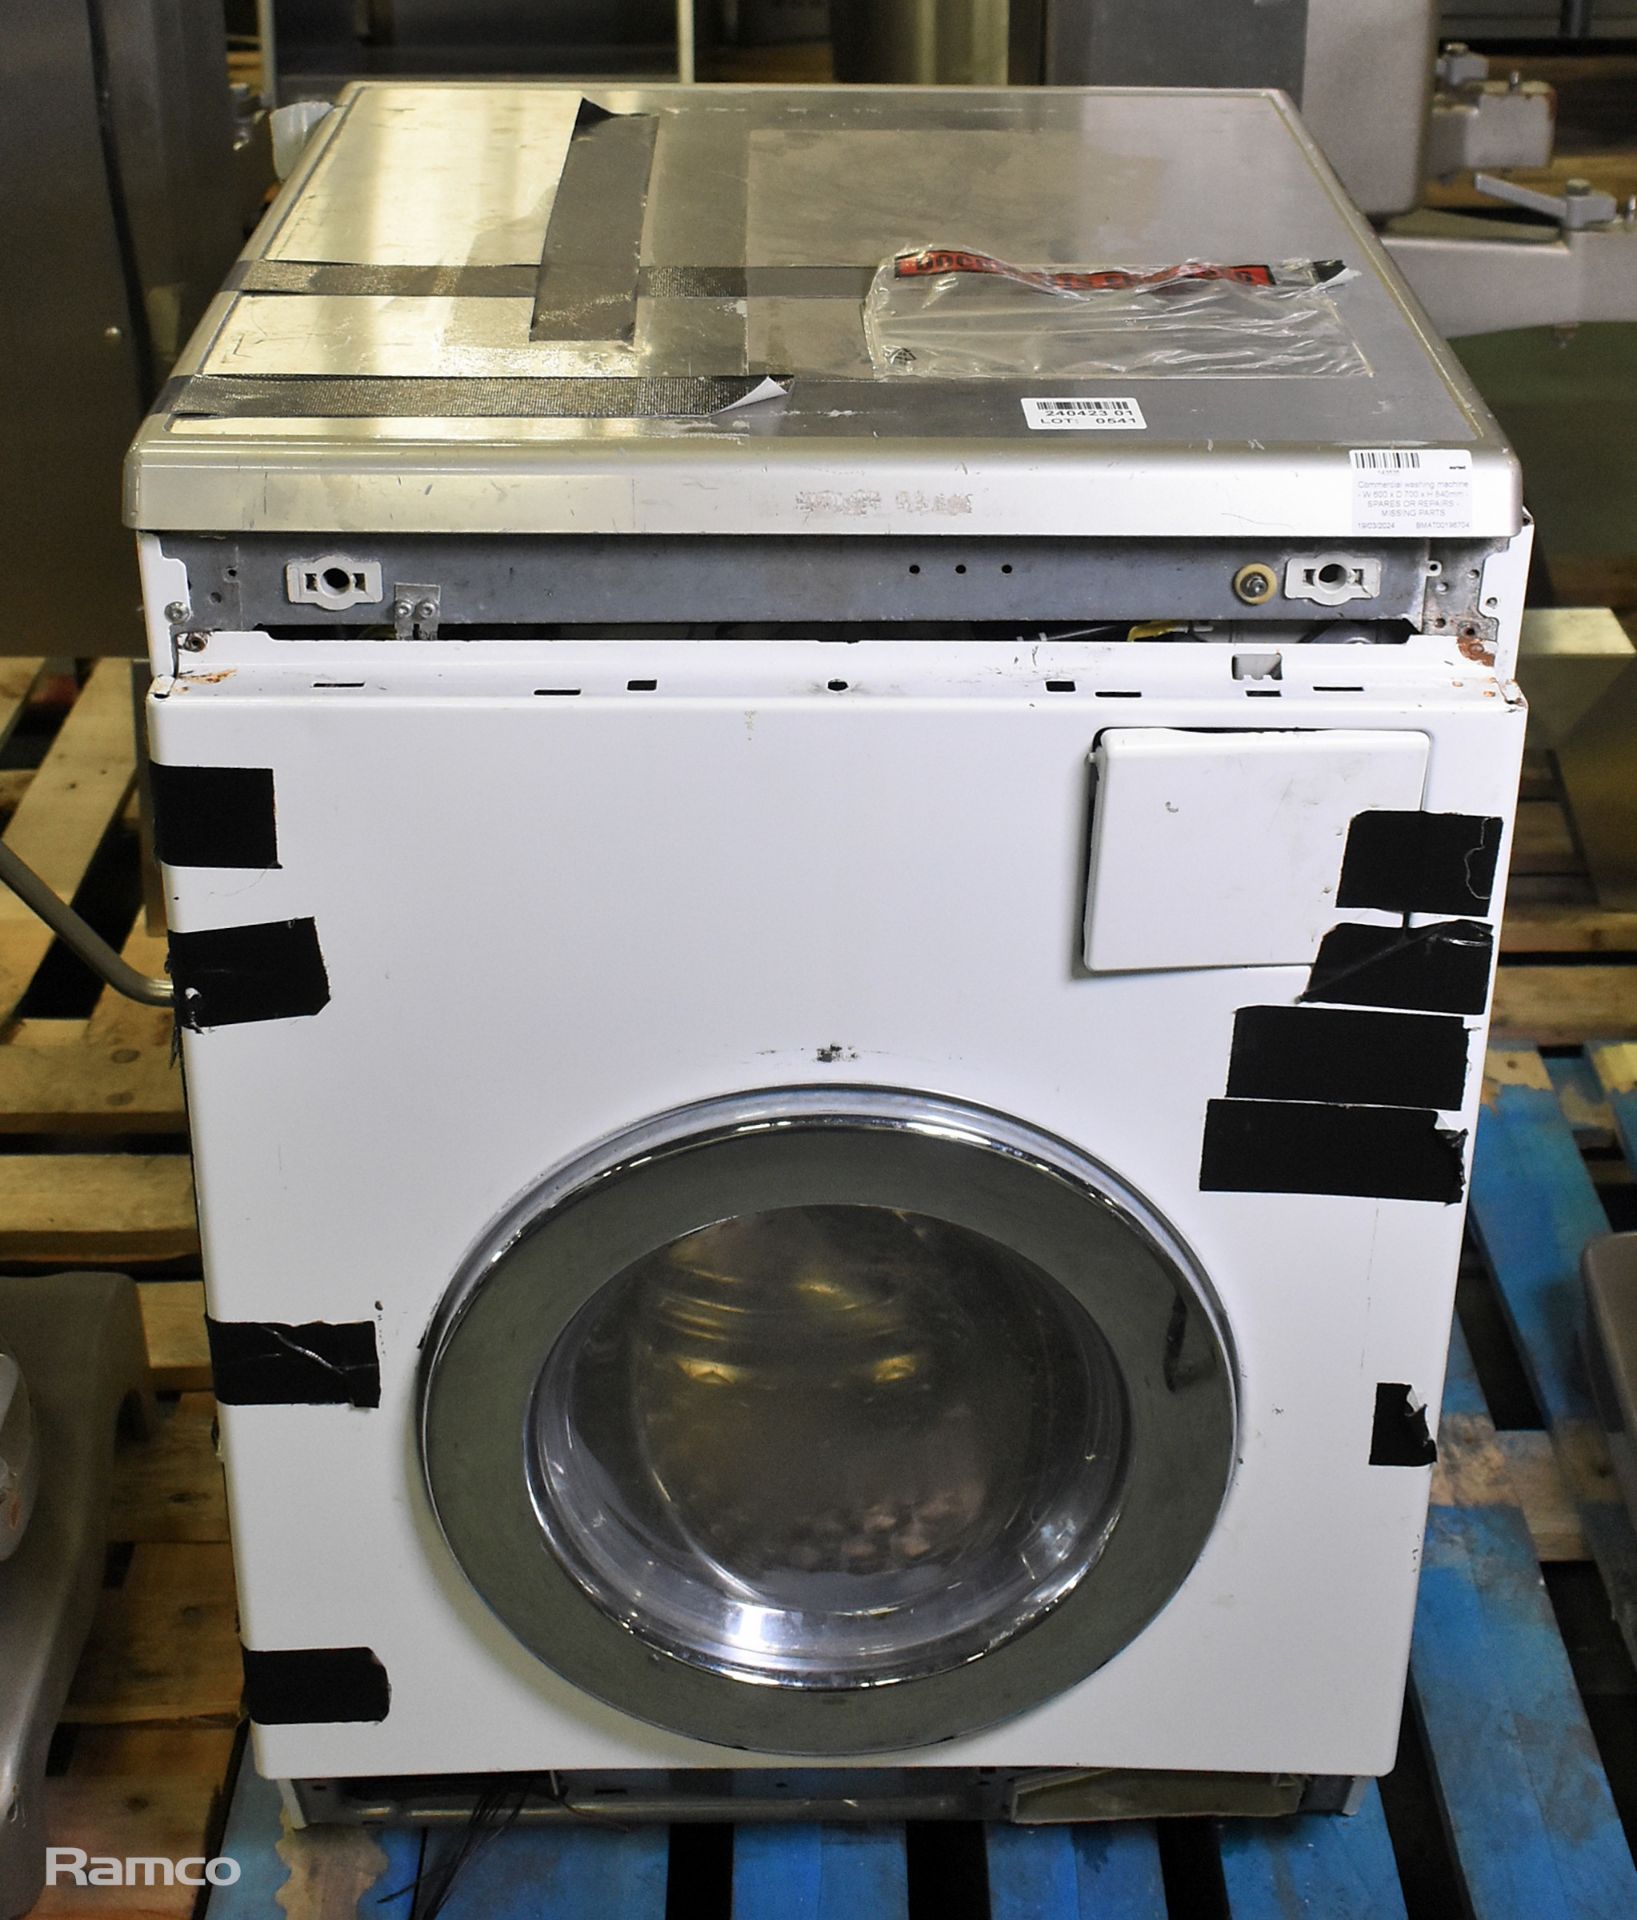 Commercial washing machine - W 600 x D 700 x H 840mm - SPARES OR REPAIRS - MISSING PARTS